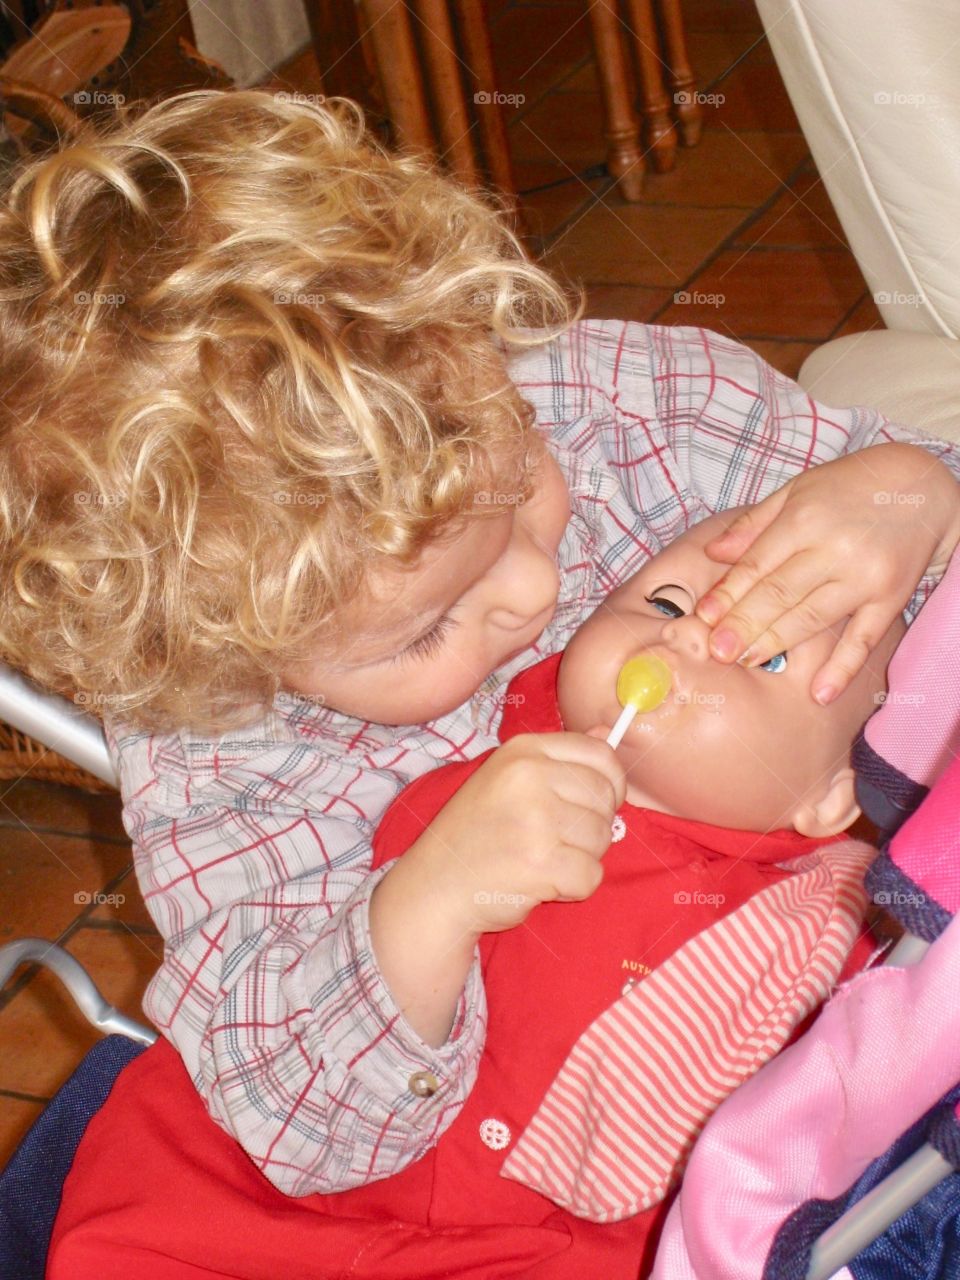 Child playing with a baby doll